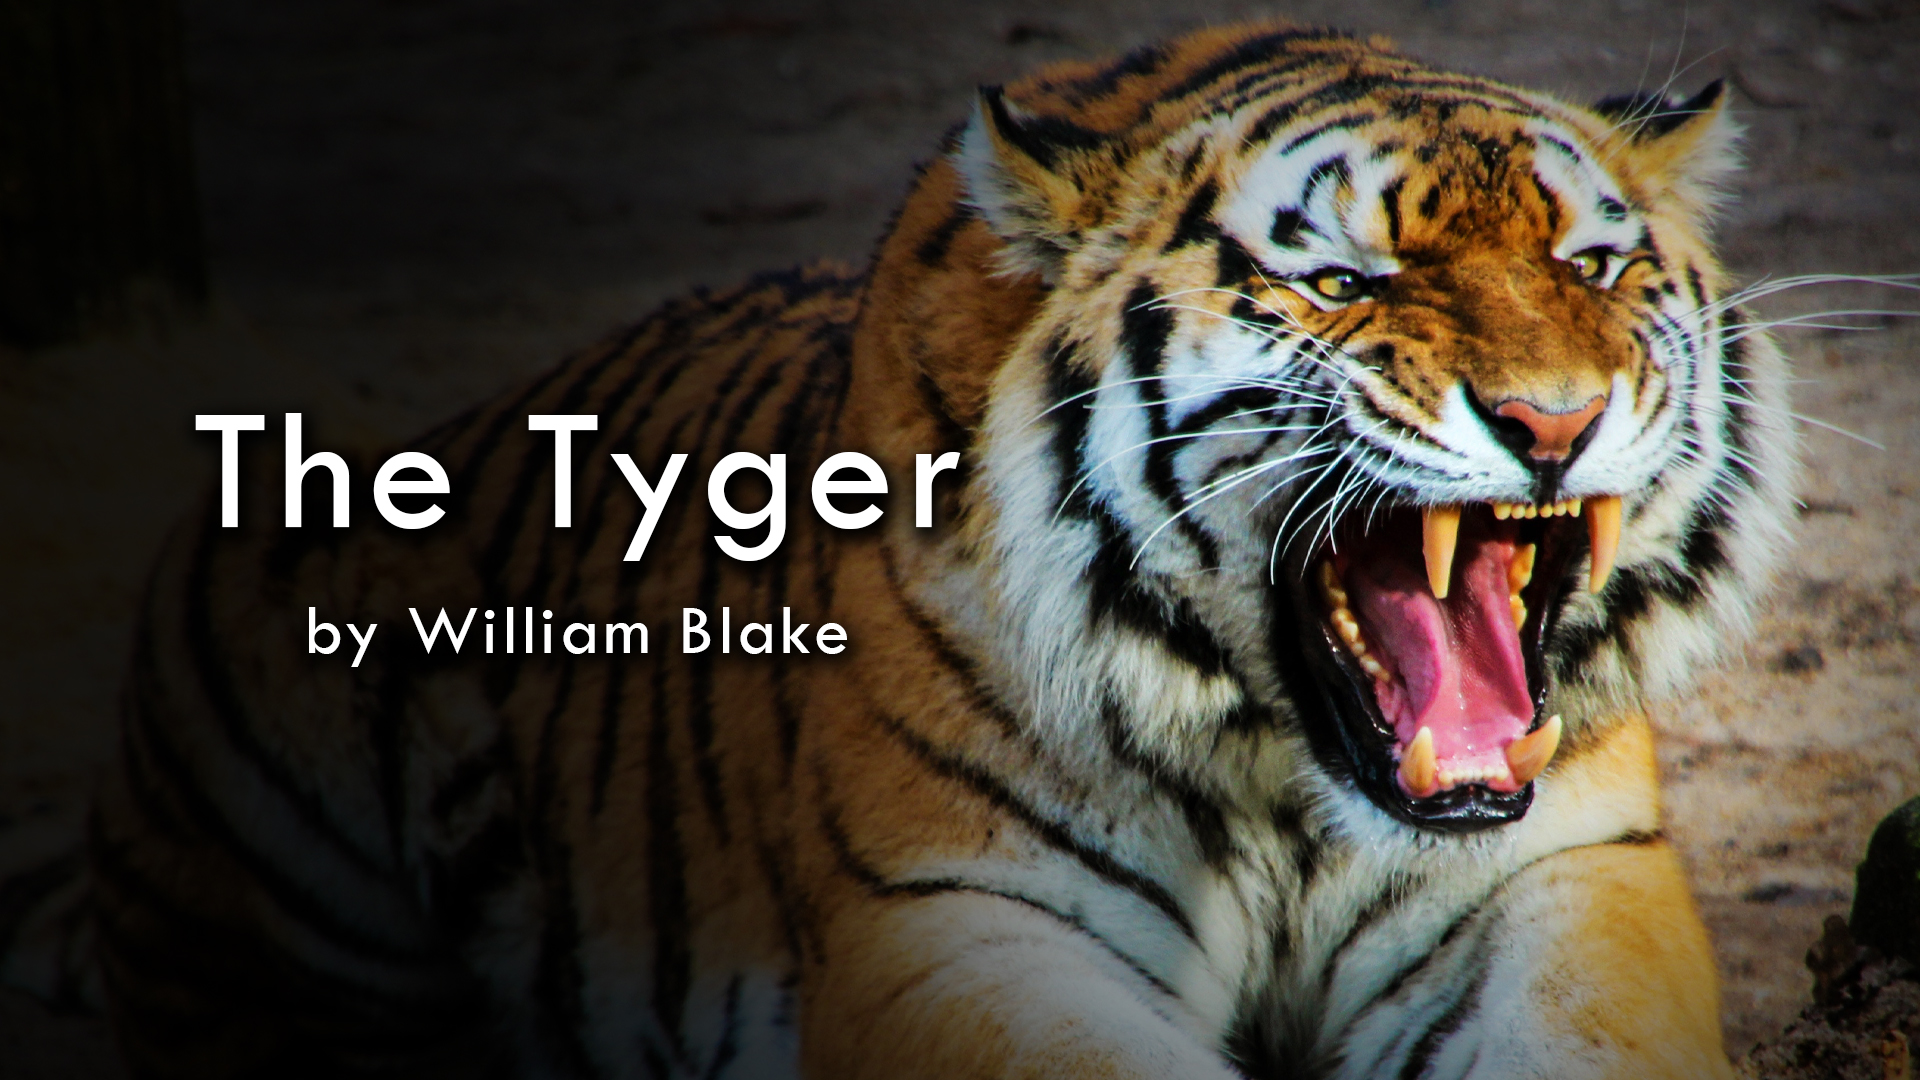 "The Tyger" by William Blake, read by Zack Lawrence